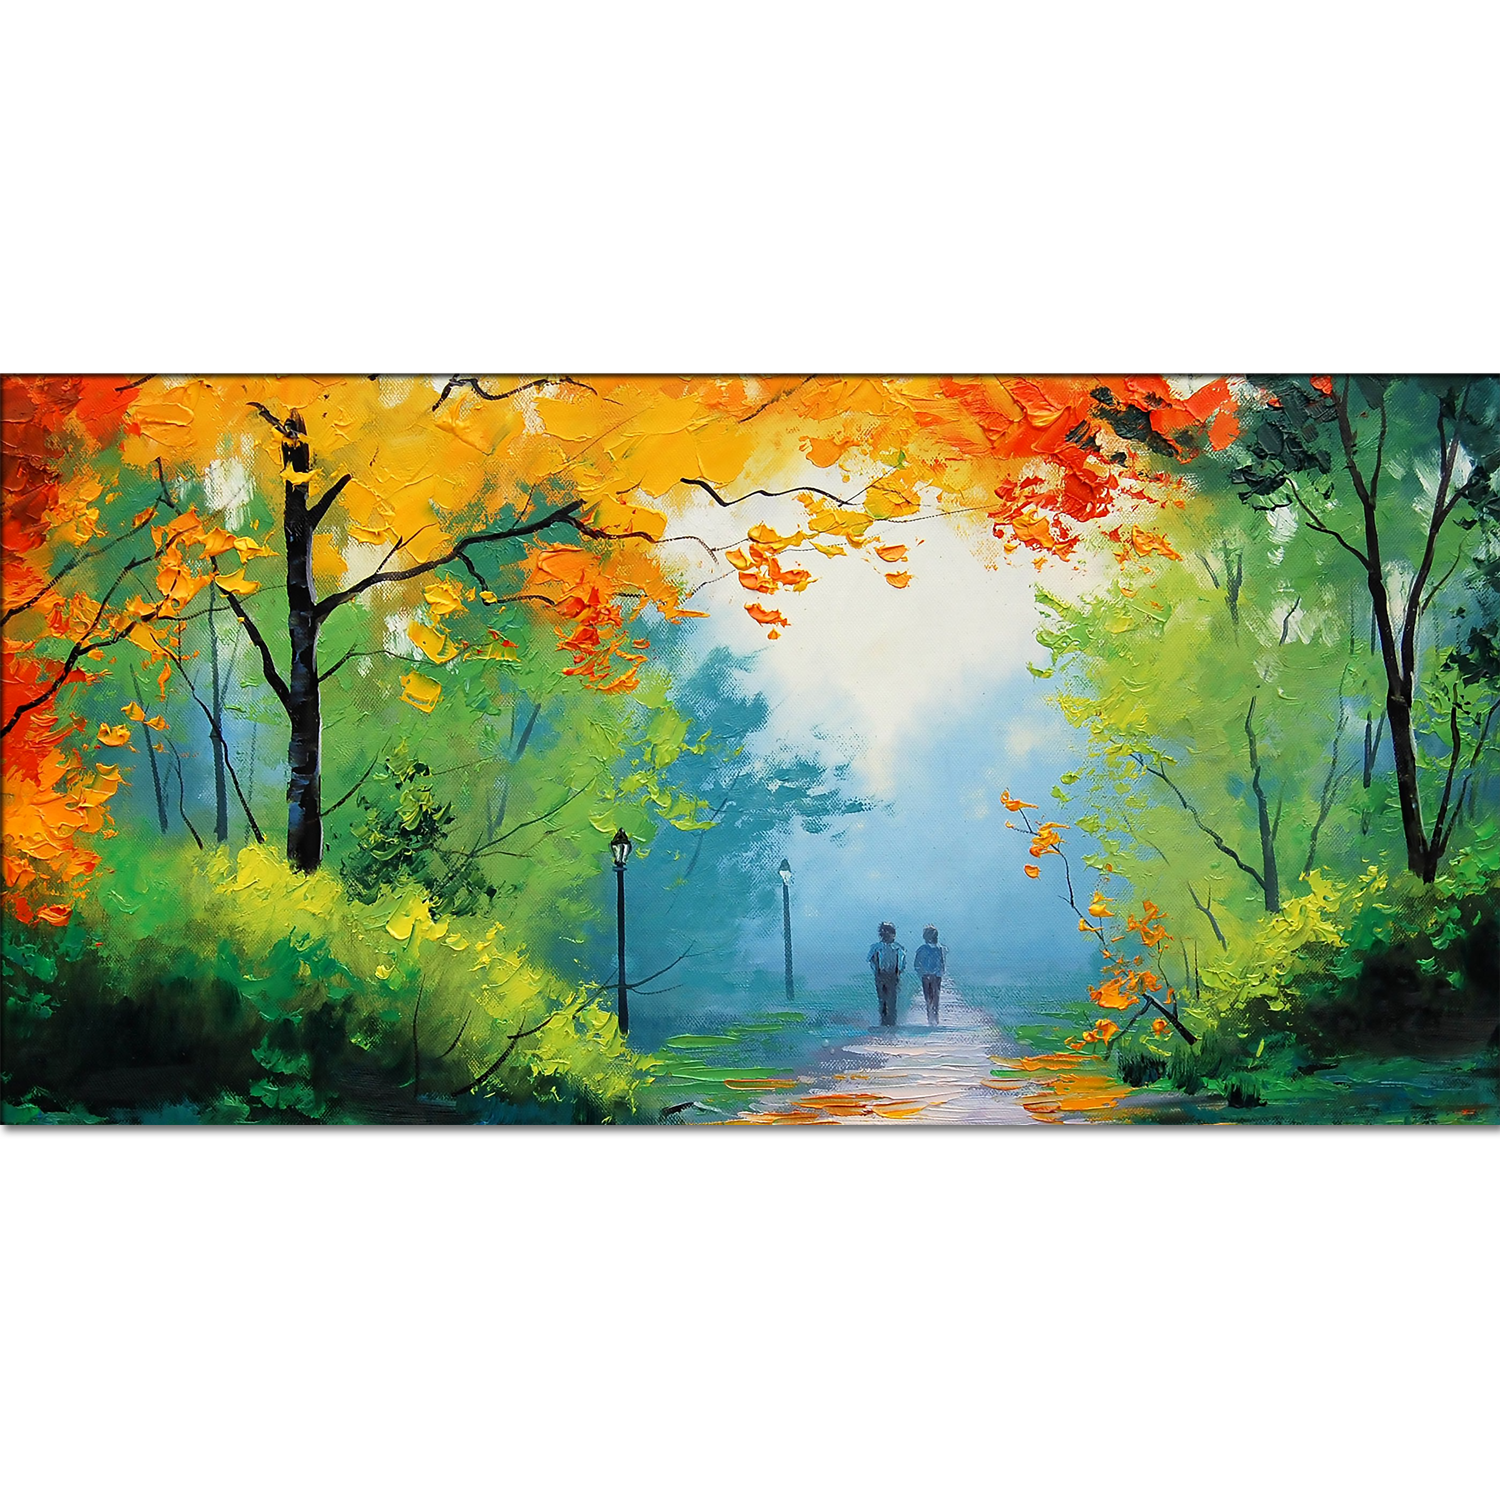 Romantic Love Couple in Forest Canvas Painting